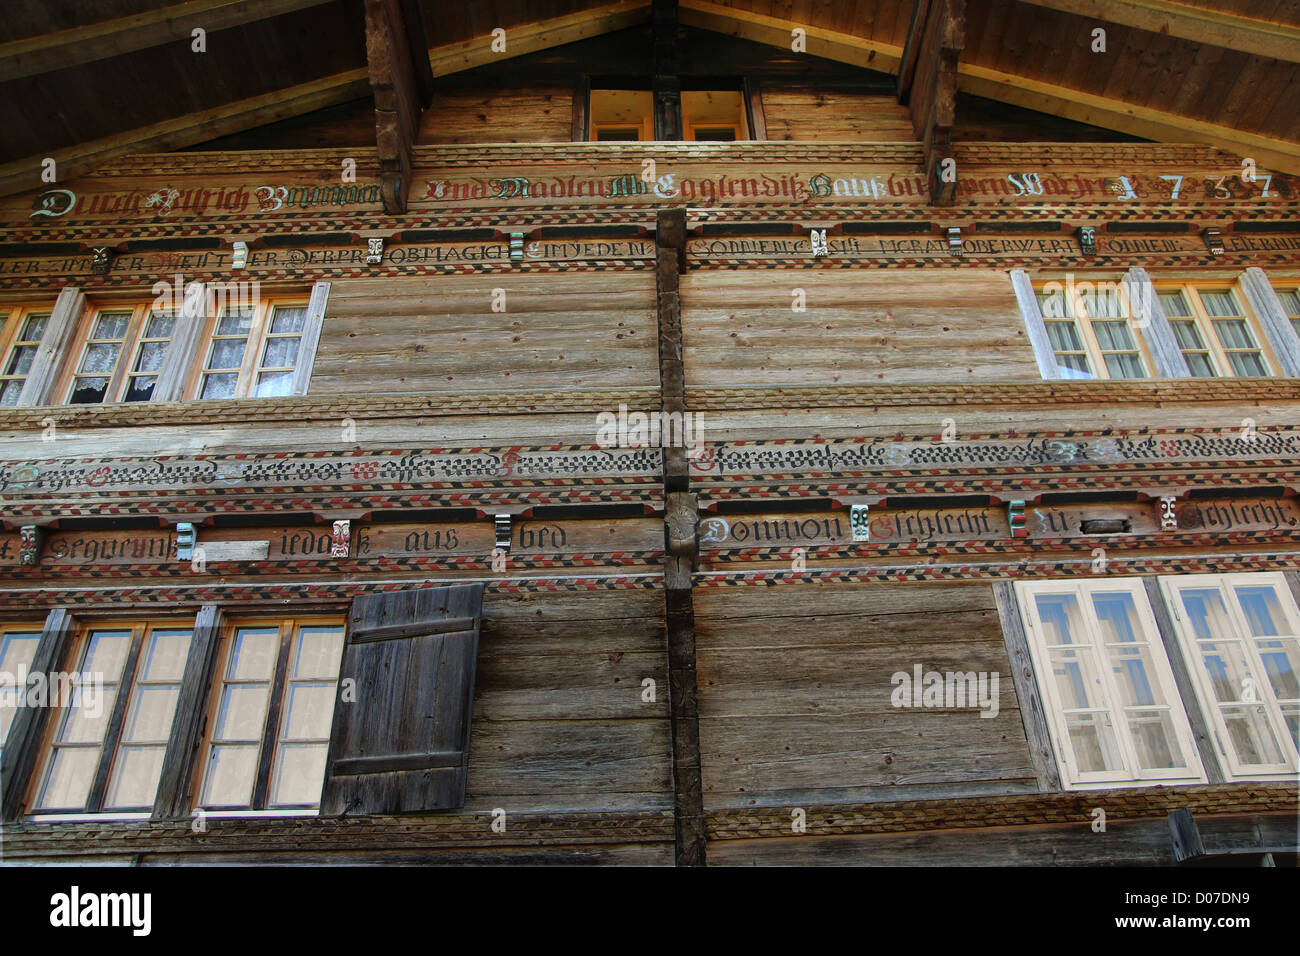 Swiss woodcarving on house front Stock Photo